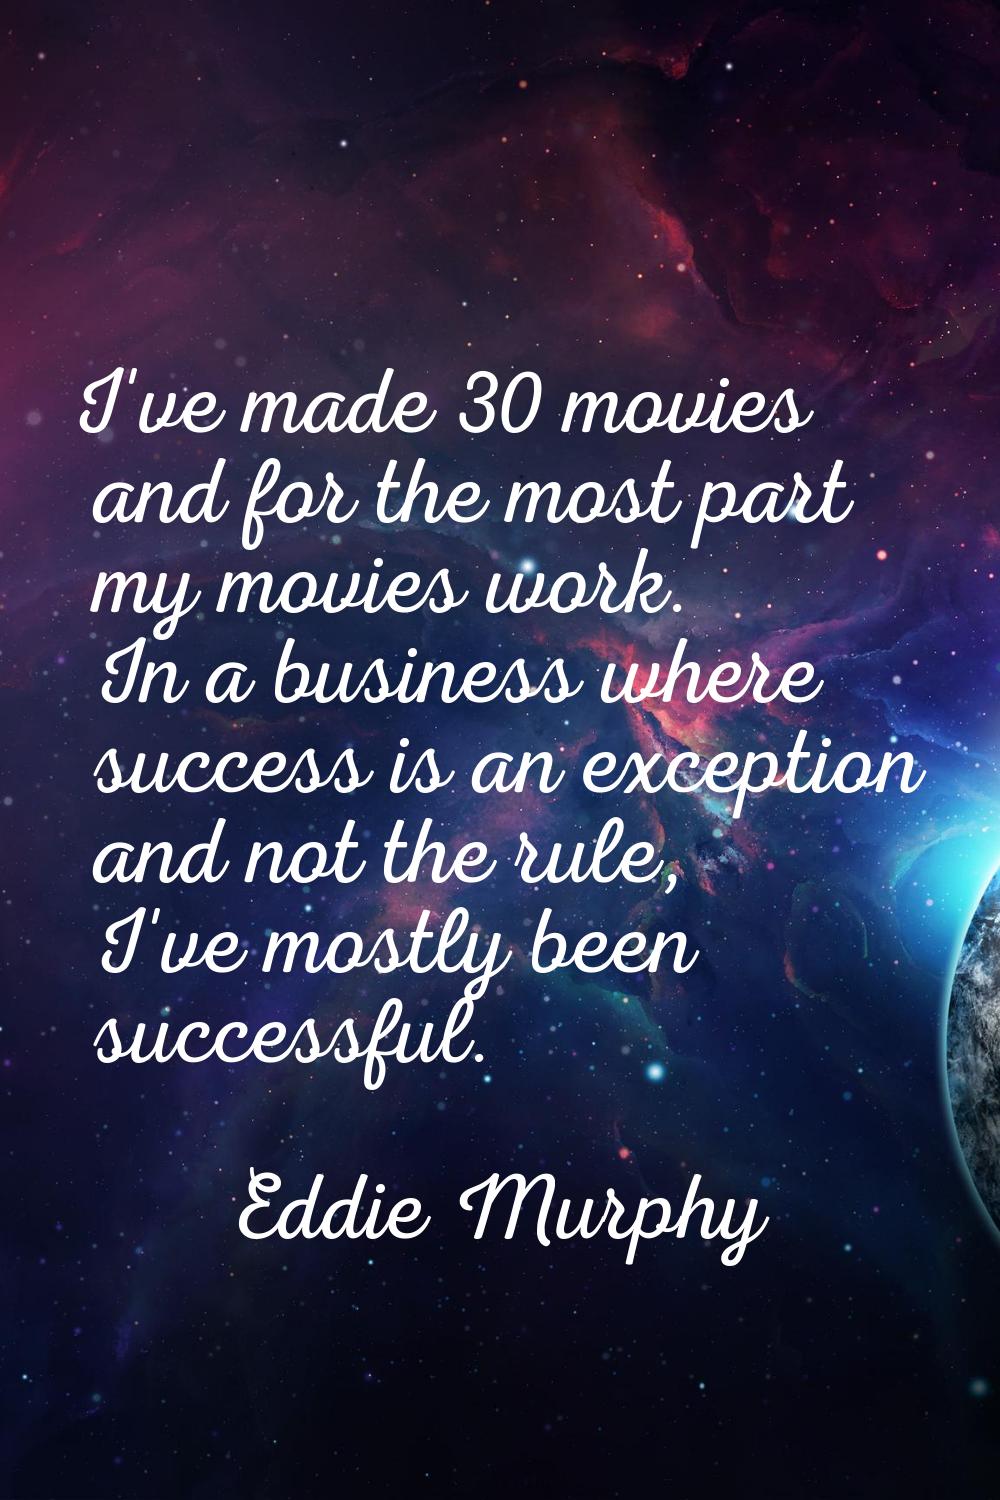 I've made 30 movies and for the most part my movies work. In a business where success is an excepti